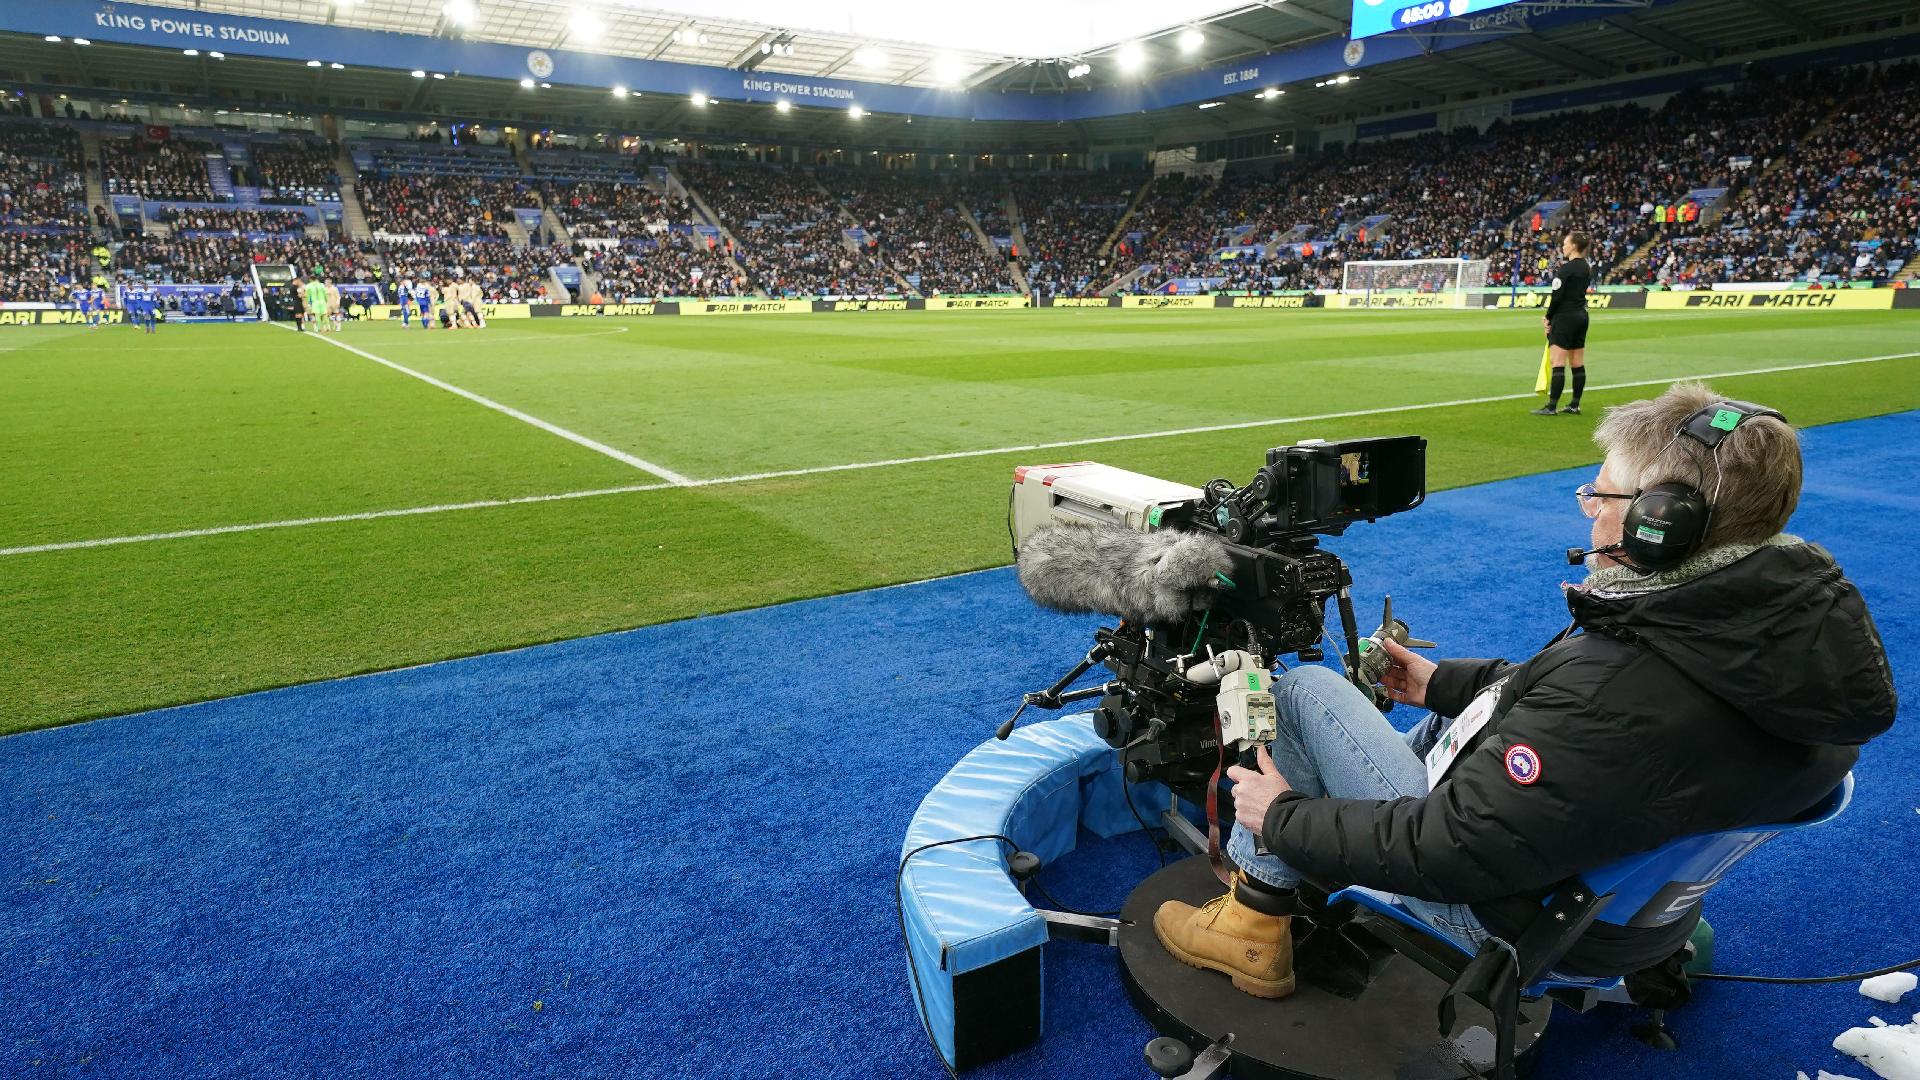 Premier League increases matches available in live television broadcast deal beIN SPORTS